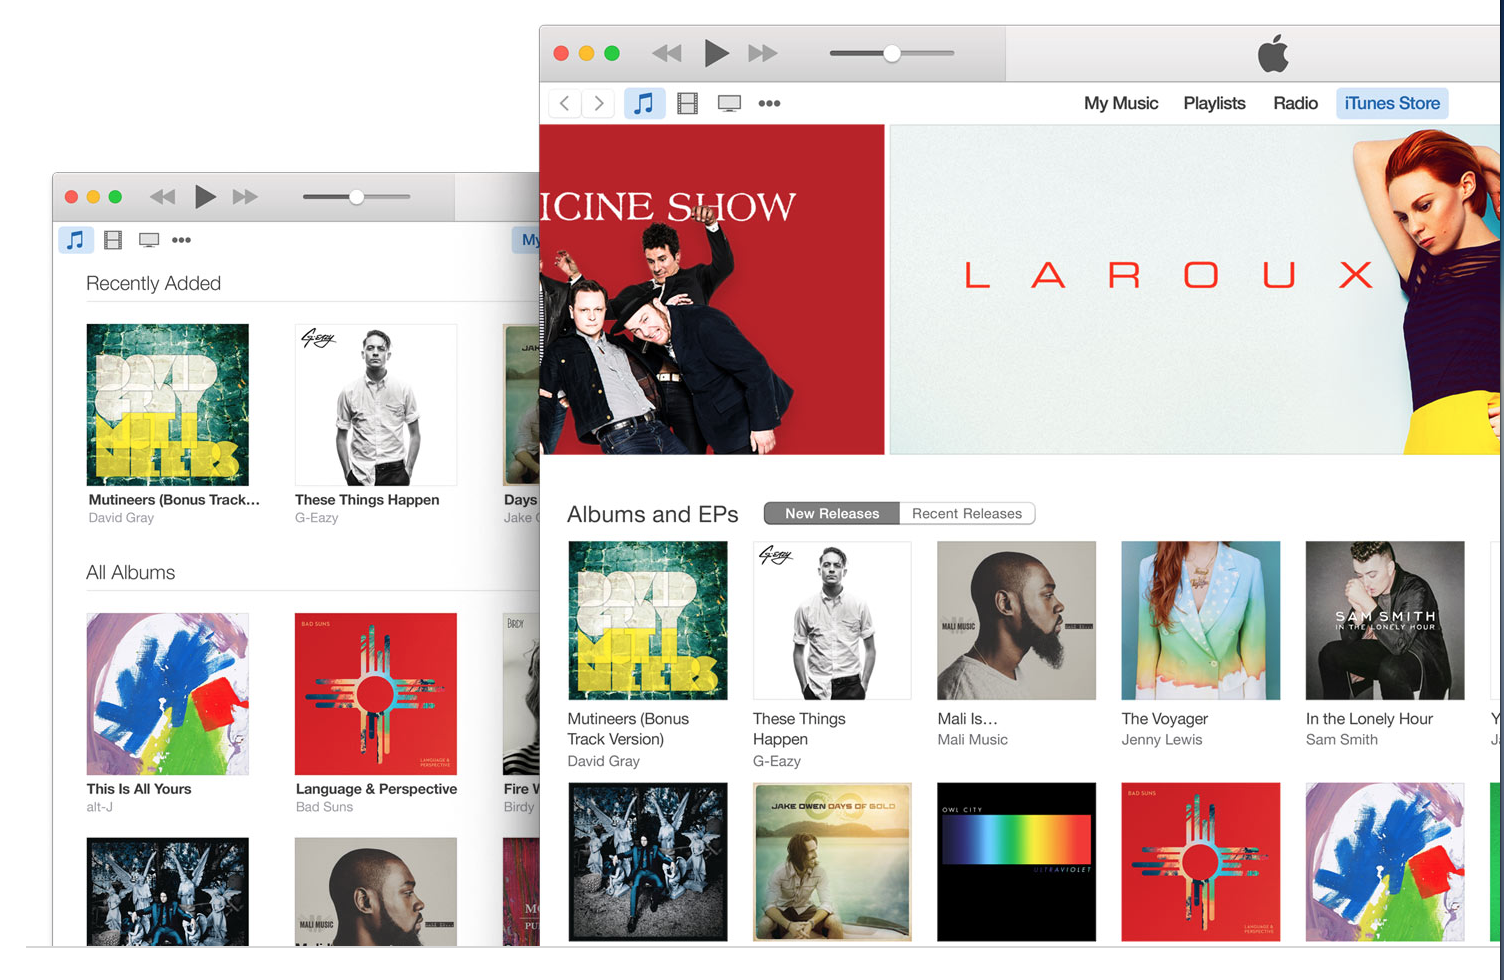 newest version of itunes